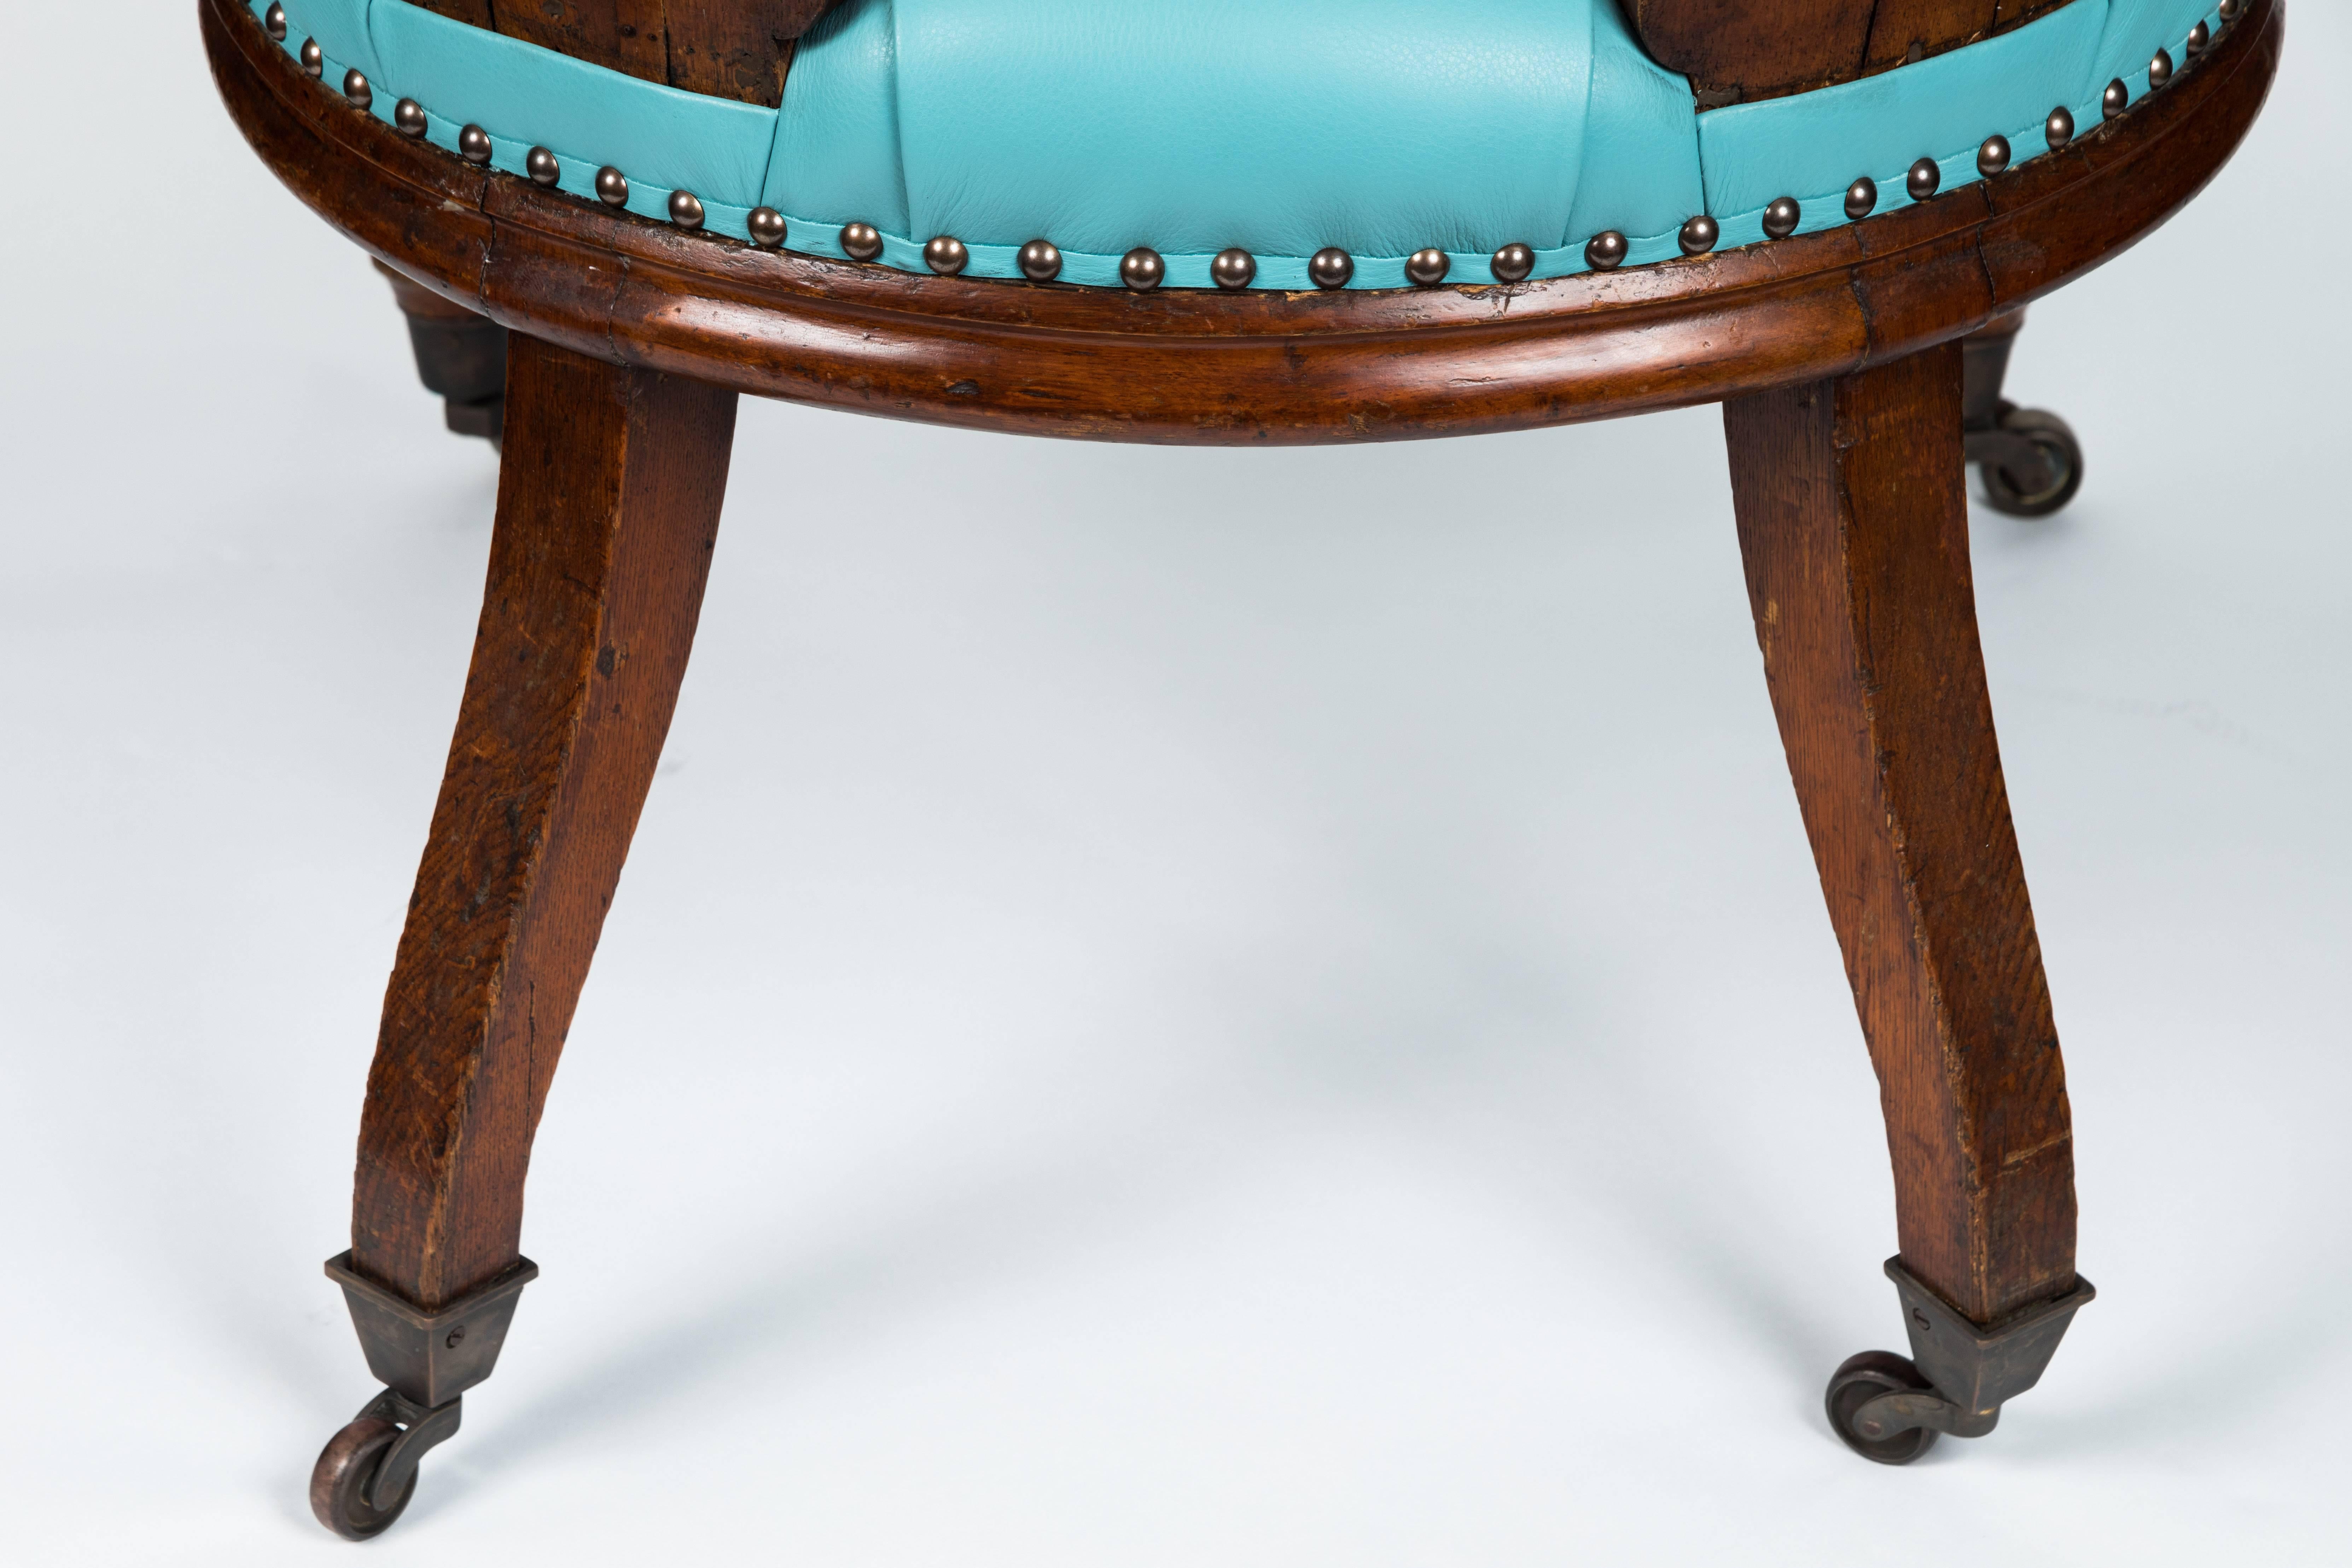 19th Century Antique William IV Chair in Mahogany and Turquoise Leather